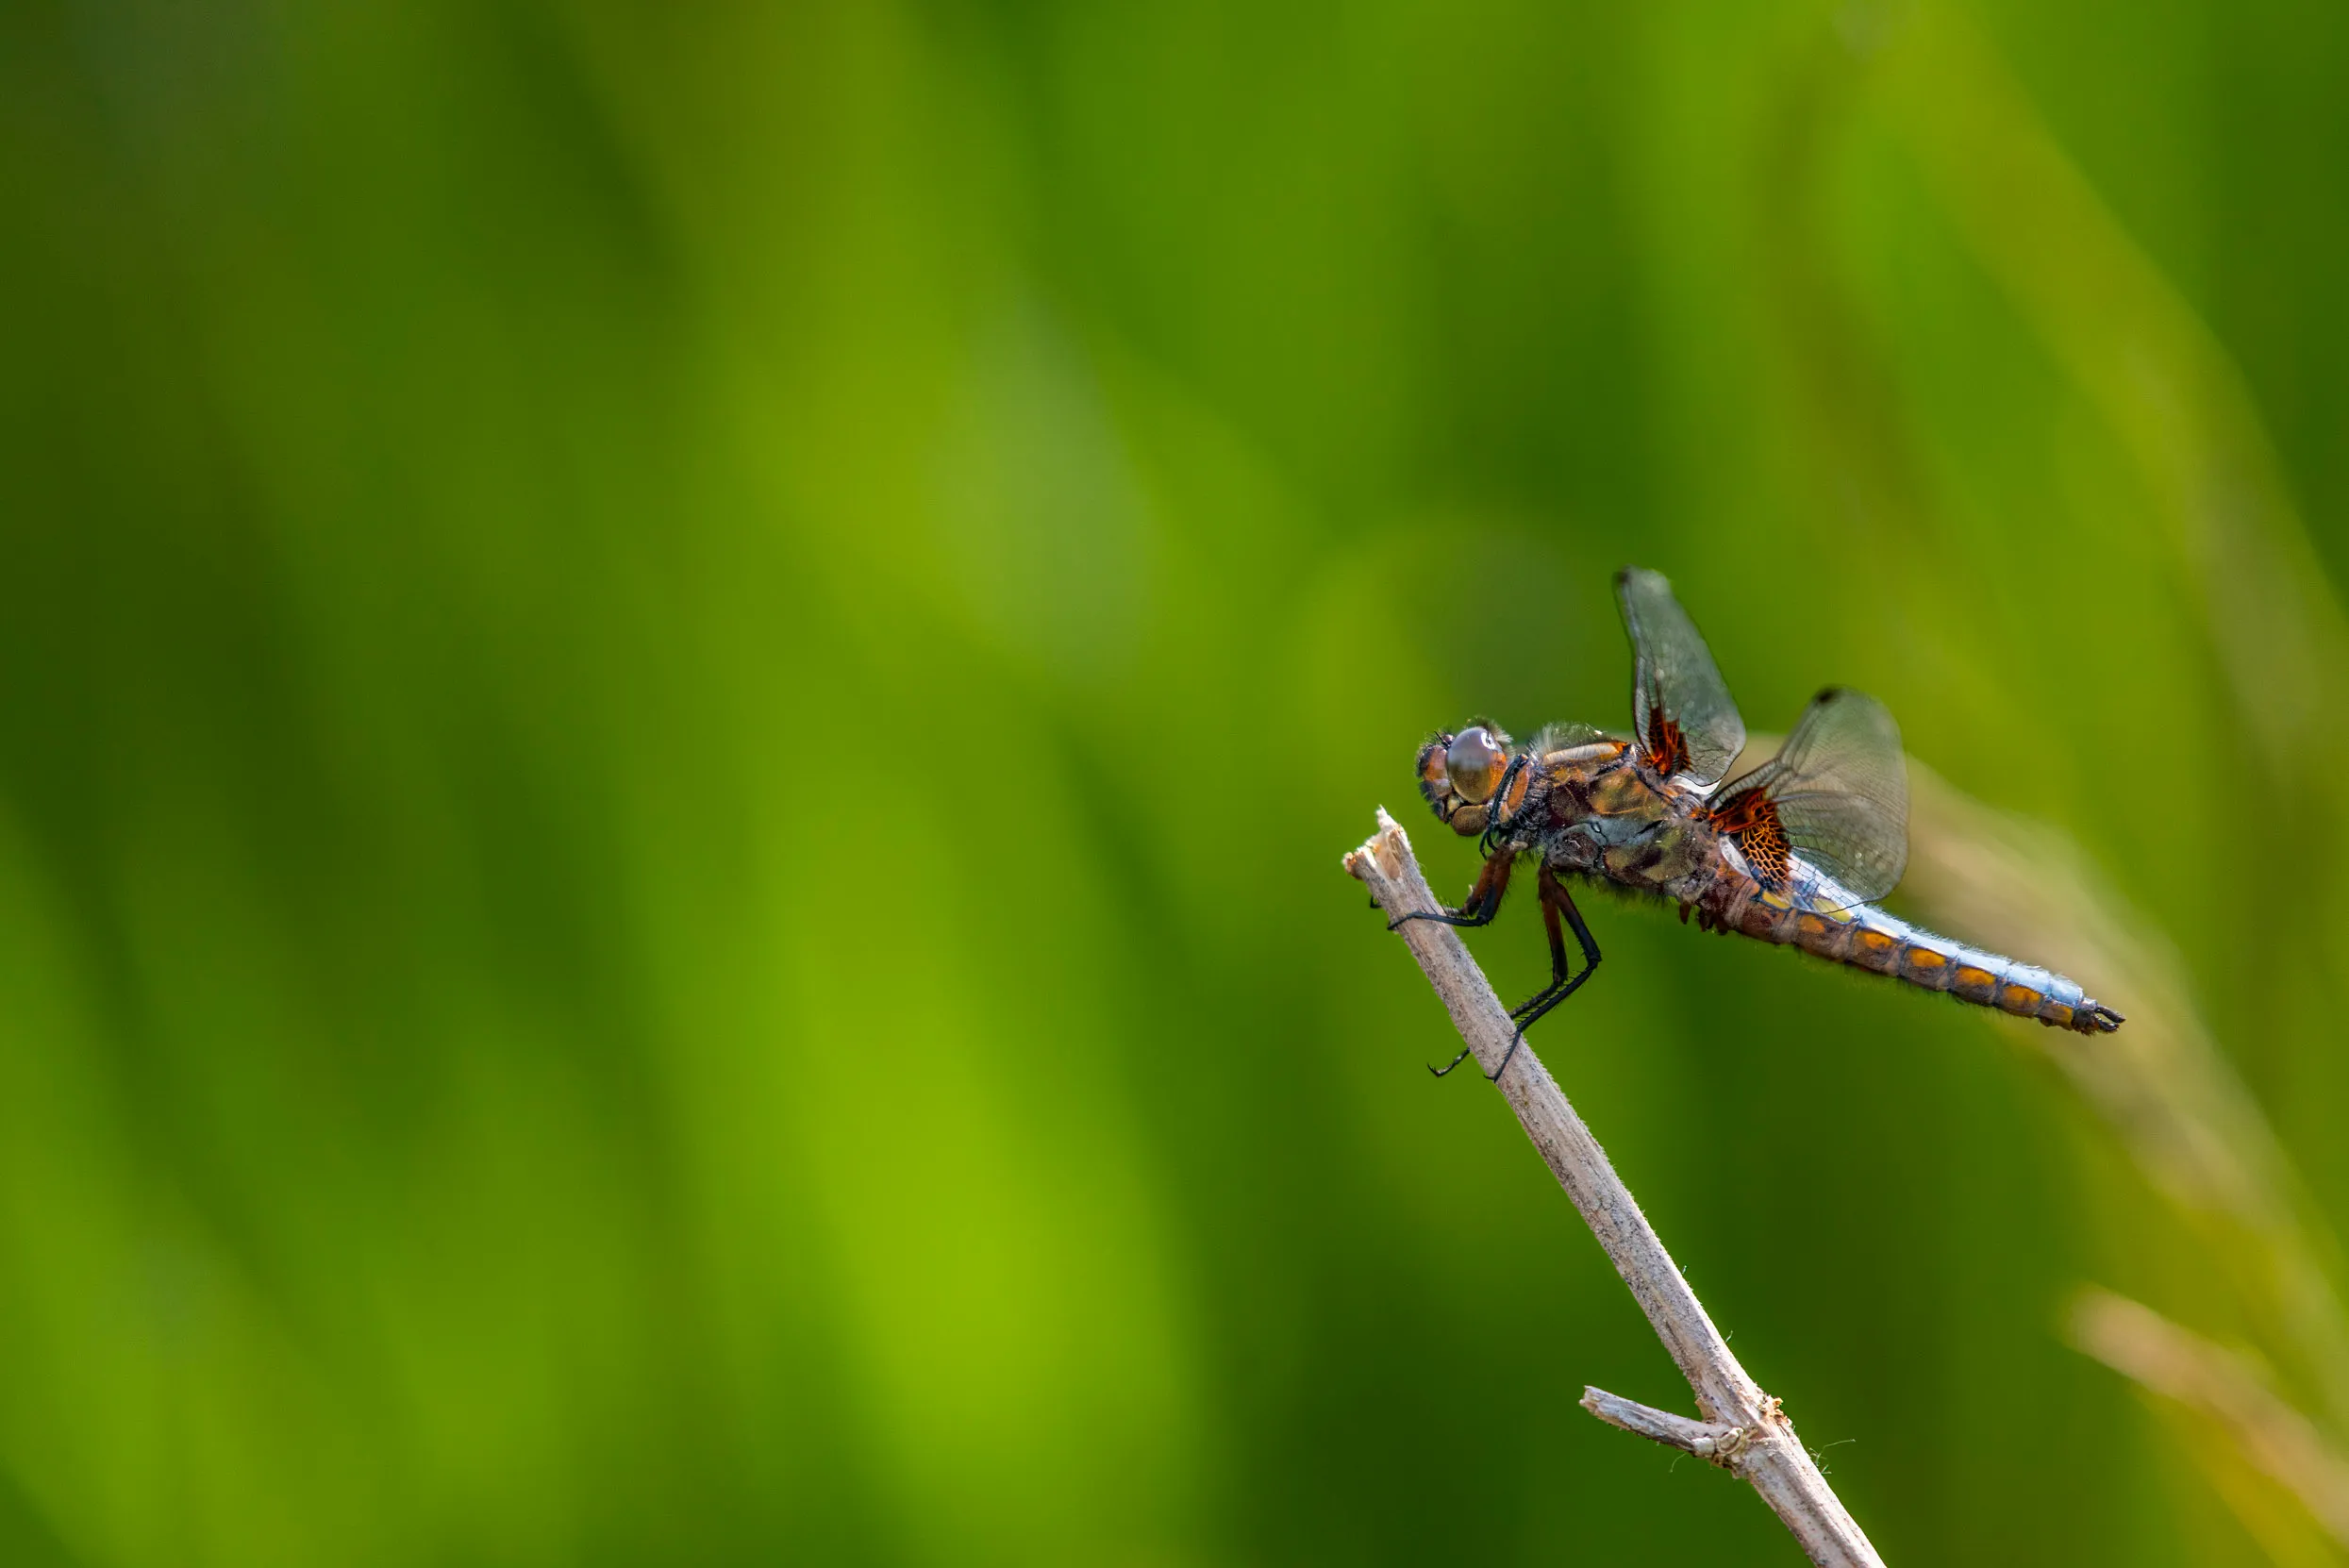 A male Broad-bodied Chaser Dragonfly perched on a twig.